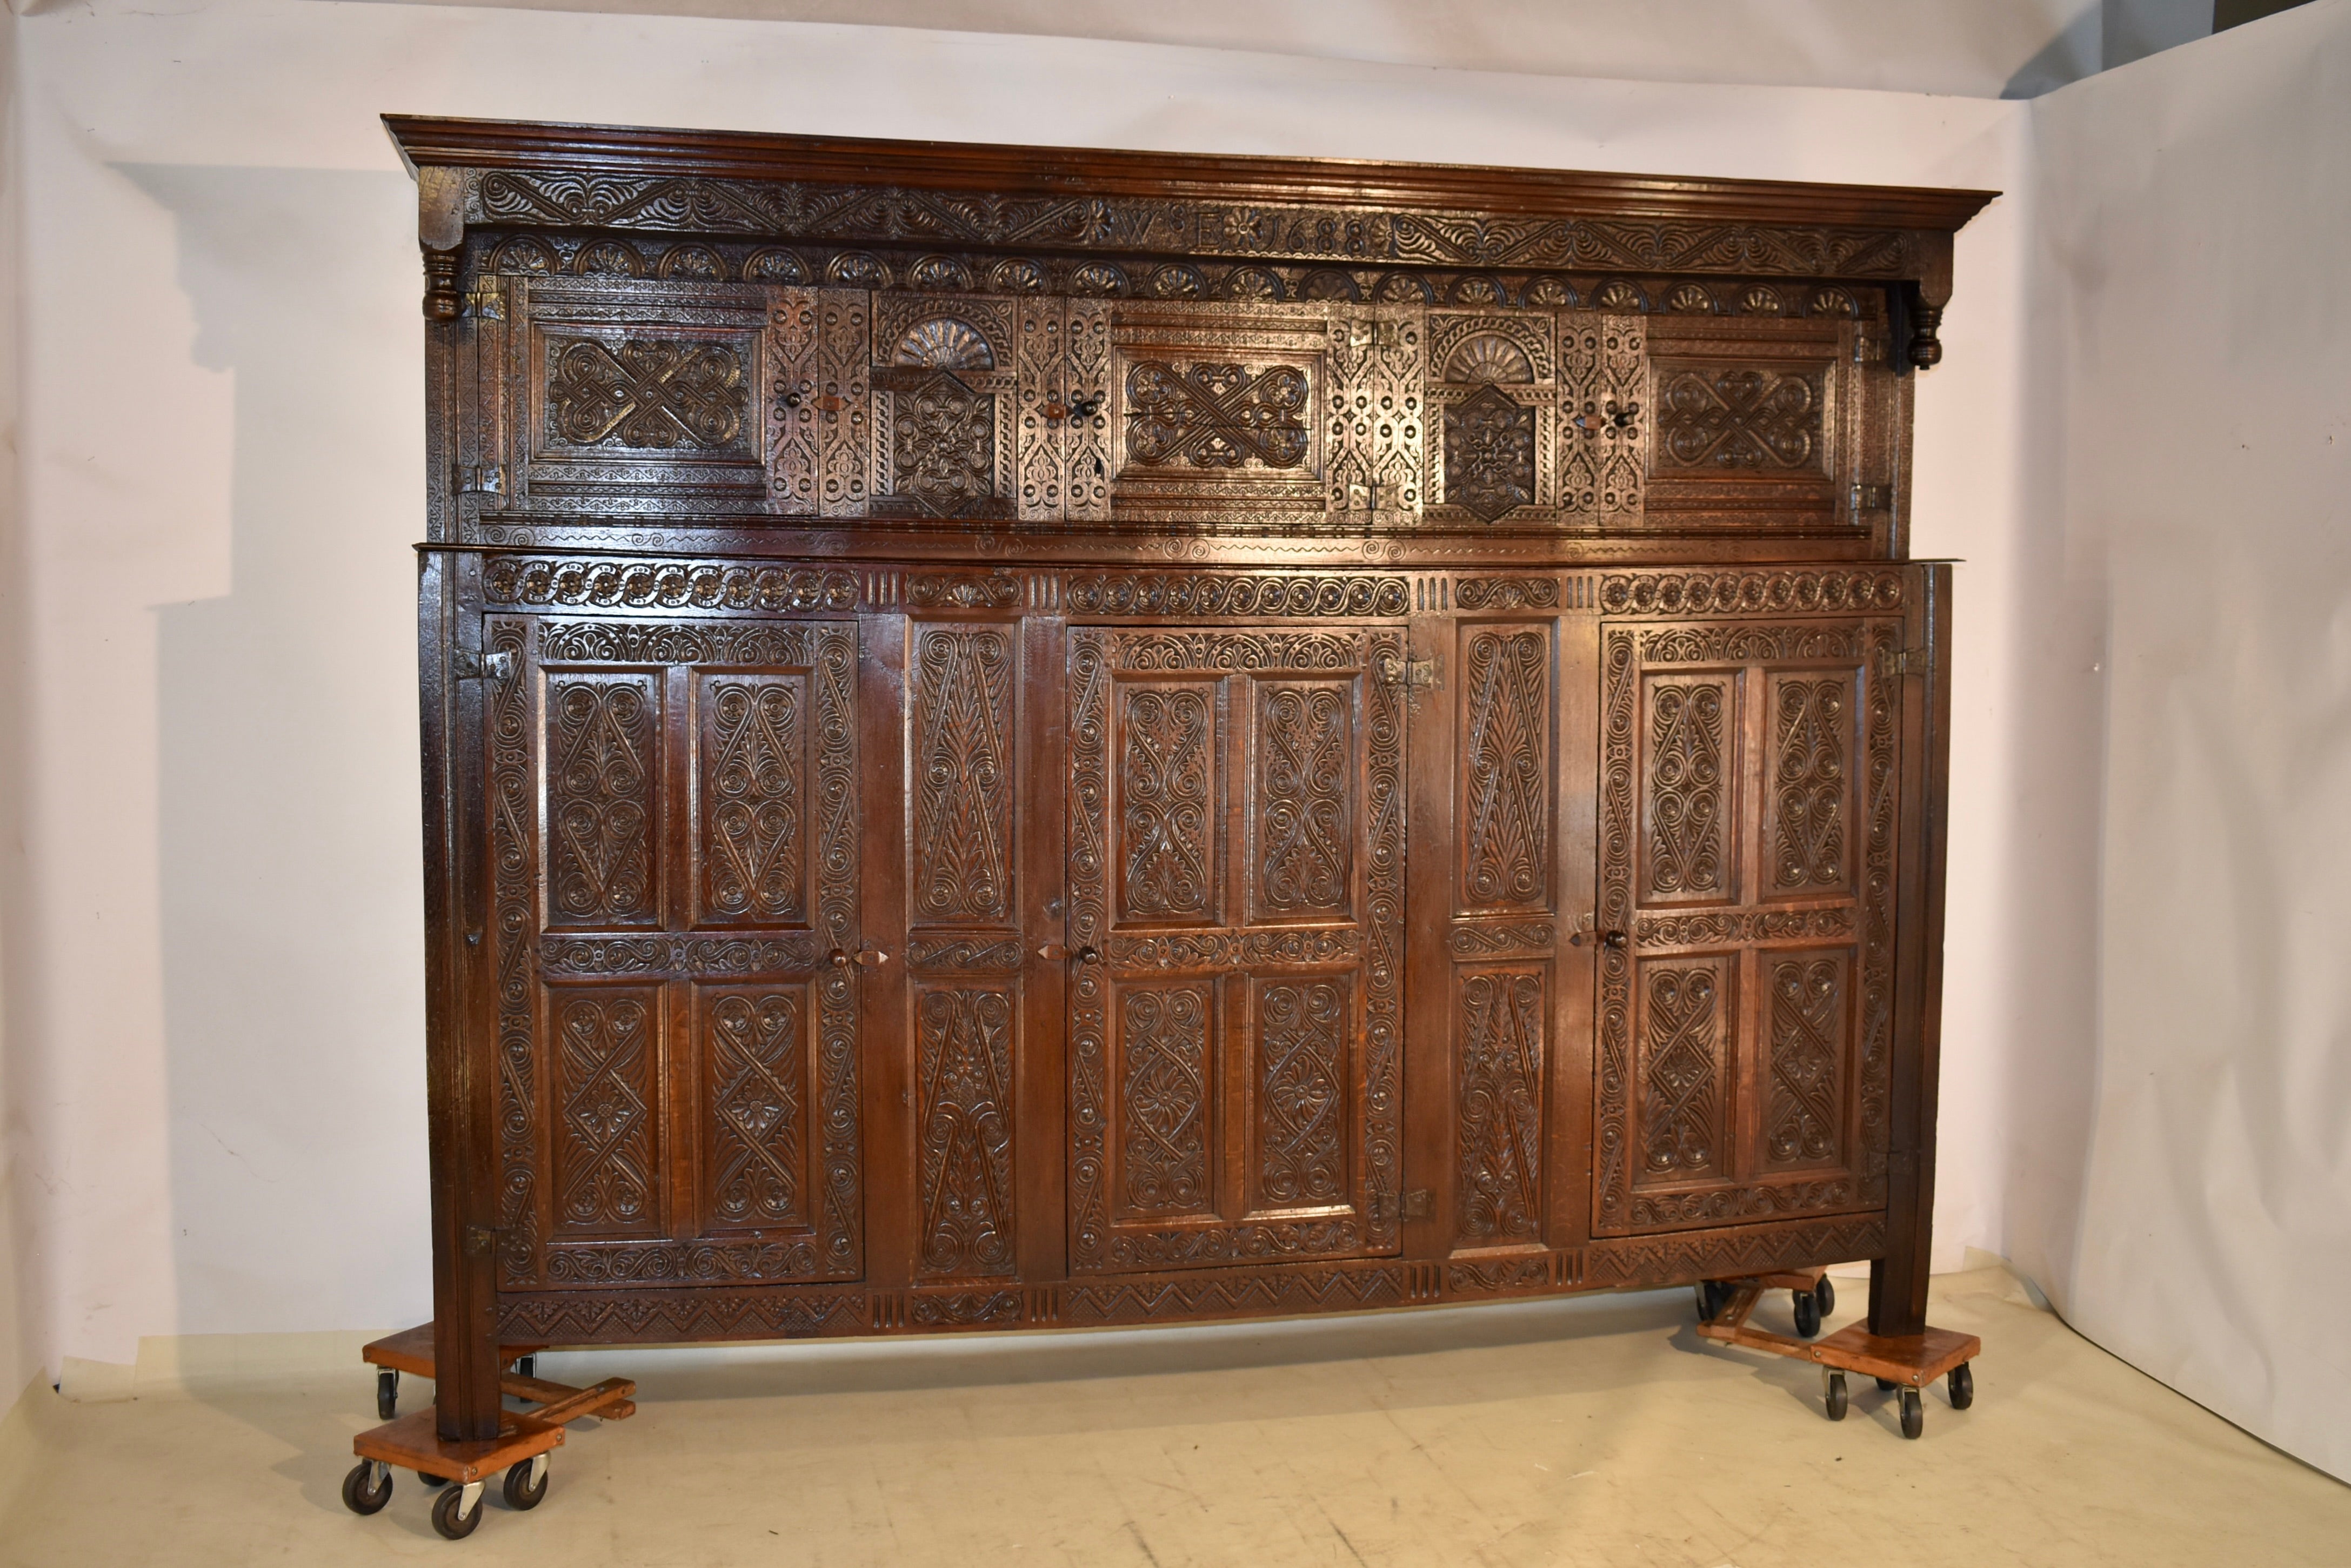 Dated 1688 James II period oak joined press cupboard from Northern England, probably Westmoreland and the Lake District area.  The top has a lovely crown molding, over five hand carved panels, with heavily carved interlace pattern on the three